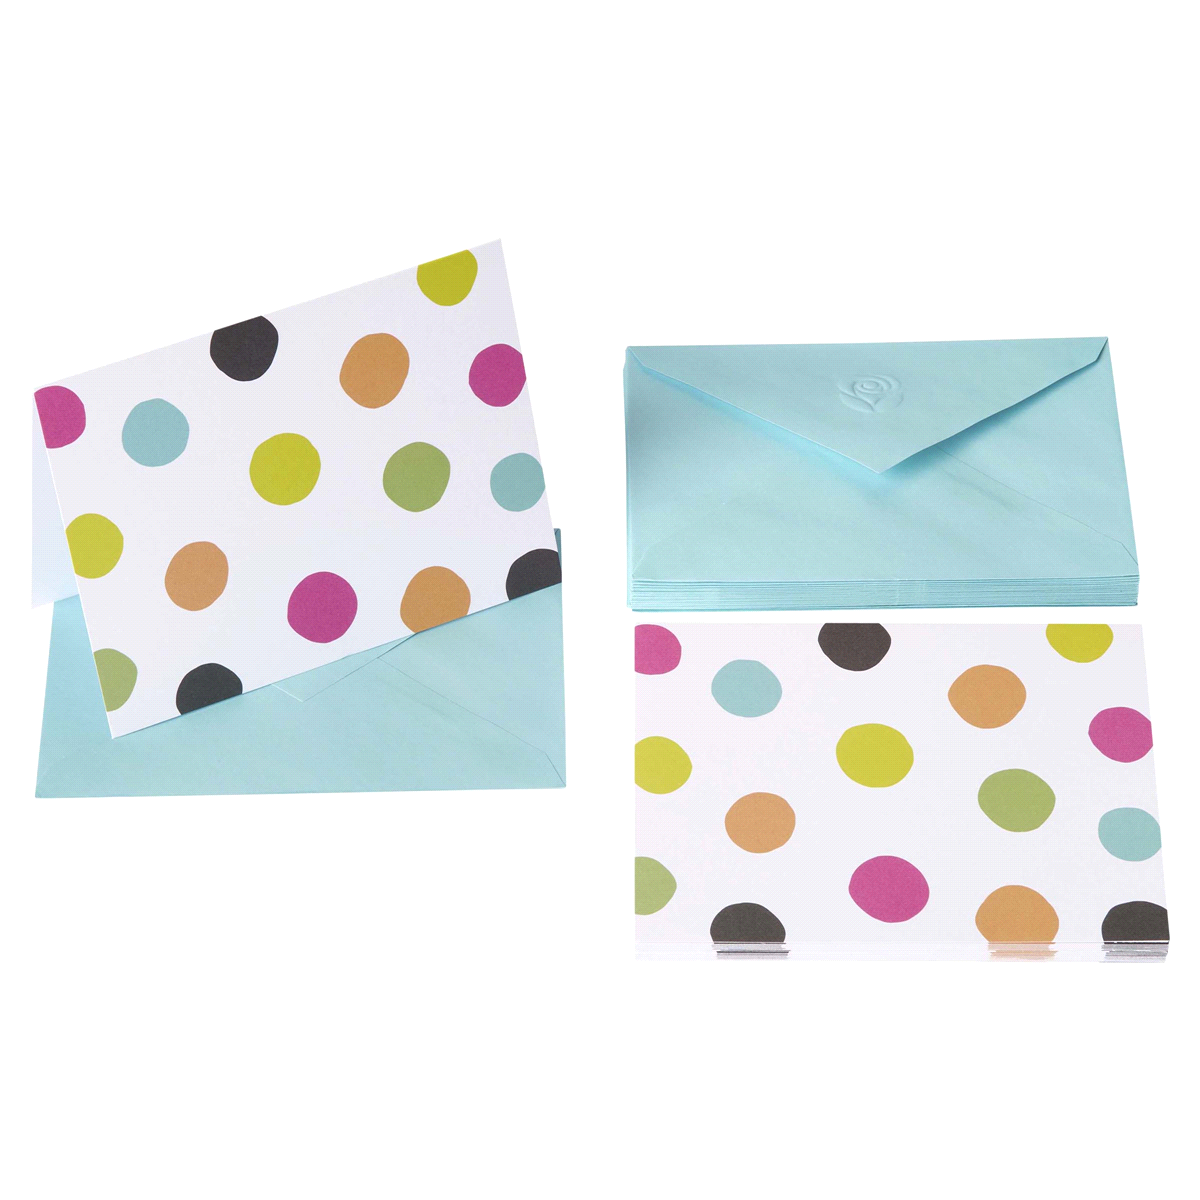 slide 9 of 9, American Greetings Blank Cards and Envelopes, Multi Dot, 20 ct